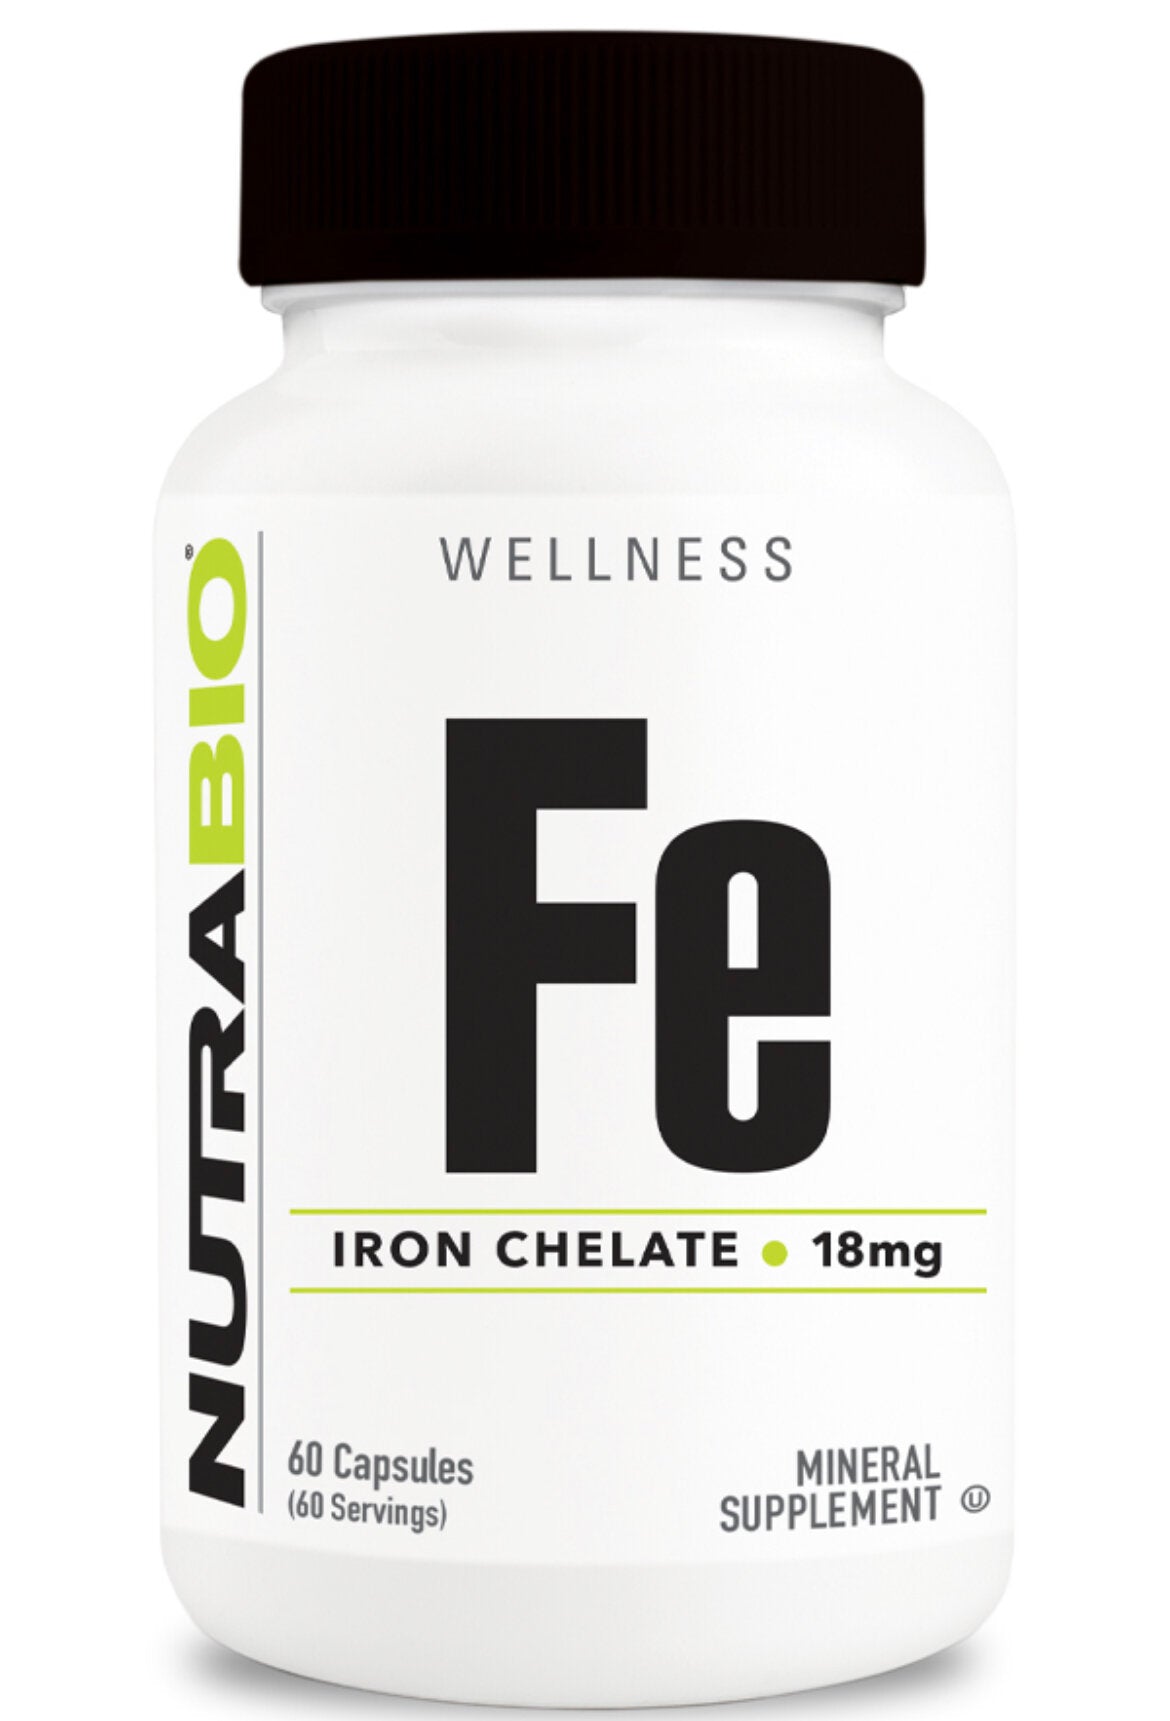 NutraBio- Iron Chelate (Fe) 18 mg 60 Capsules - Krazy Muscle Nutrition Not specifiedSQ8993139